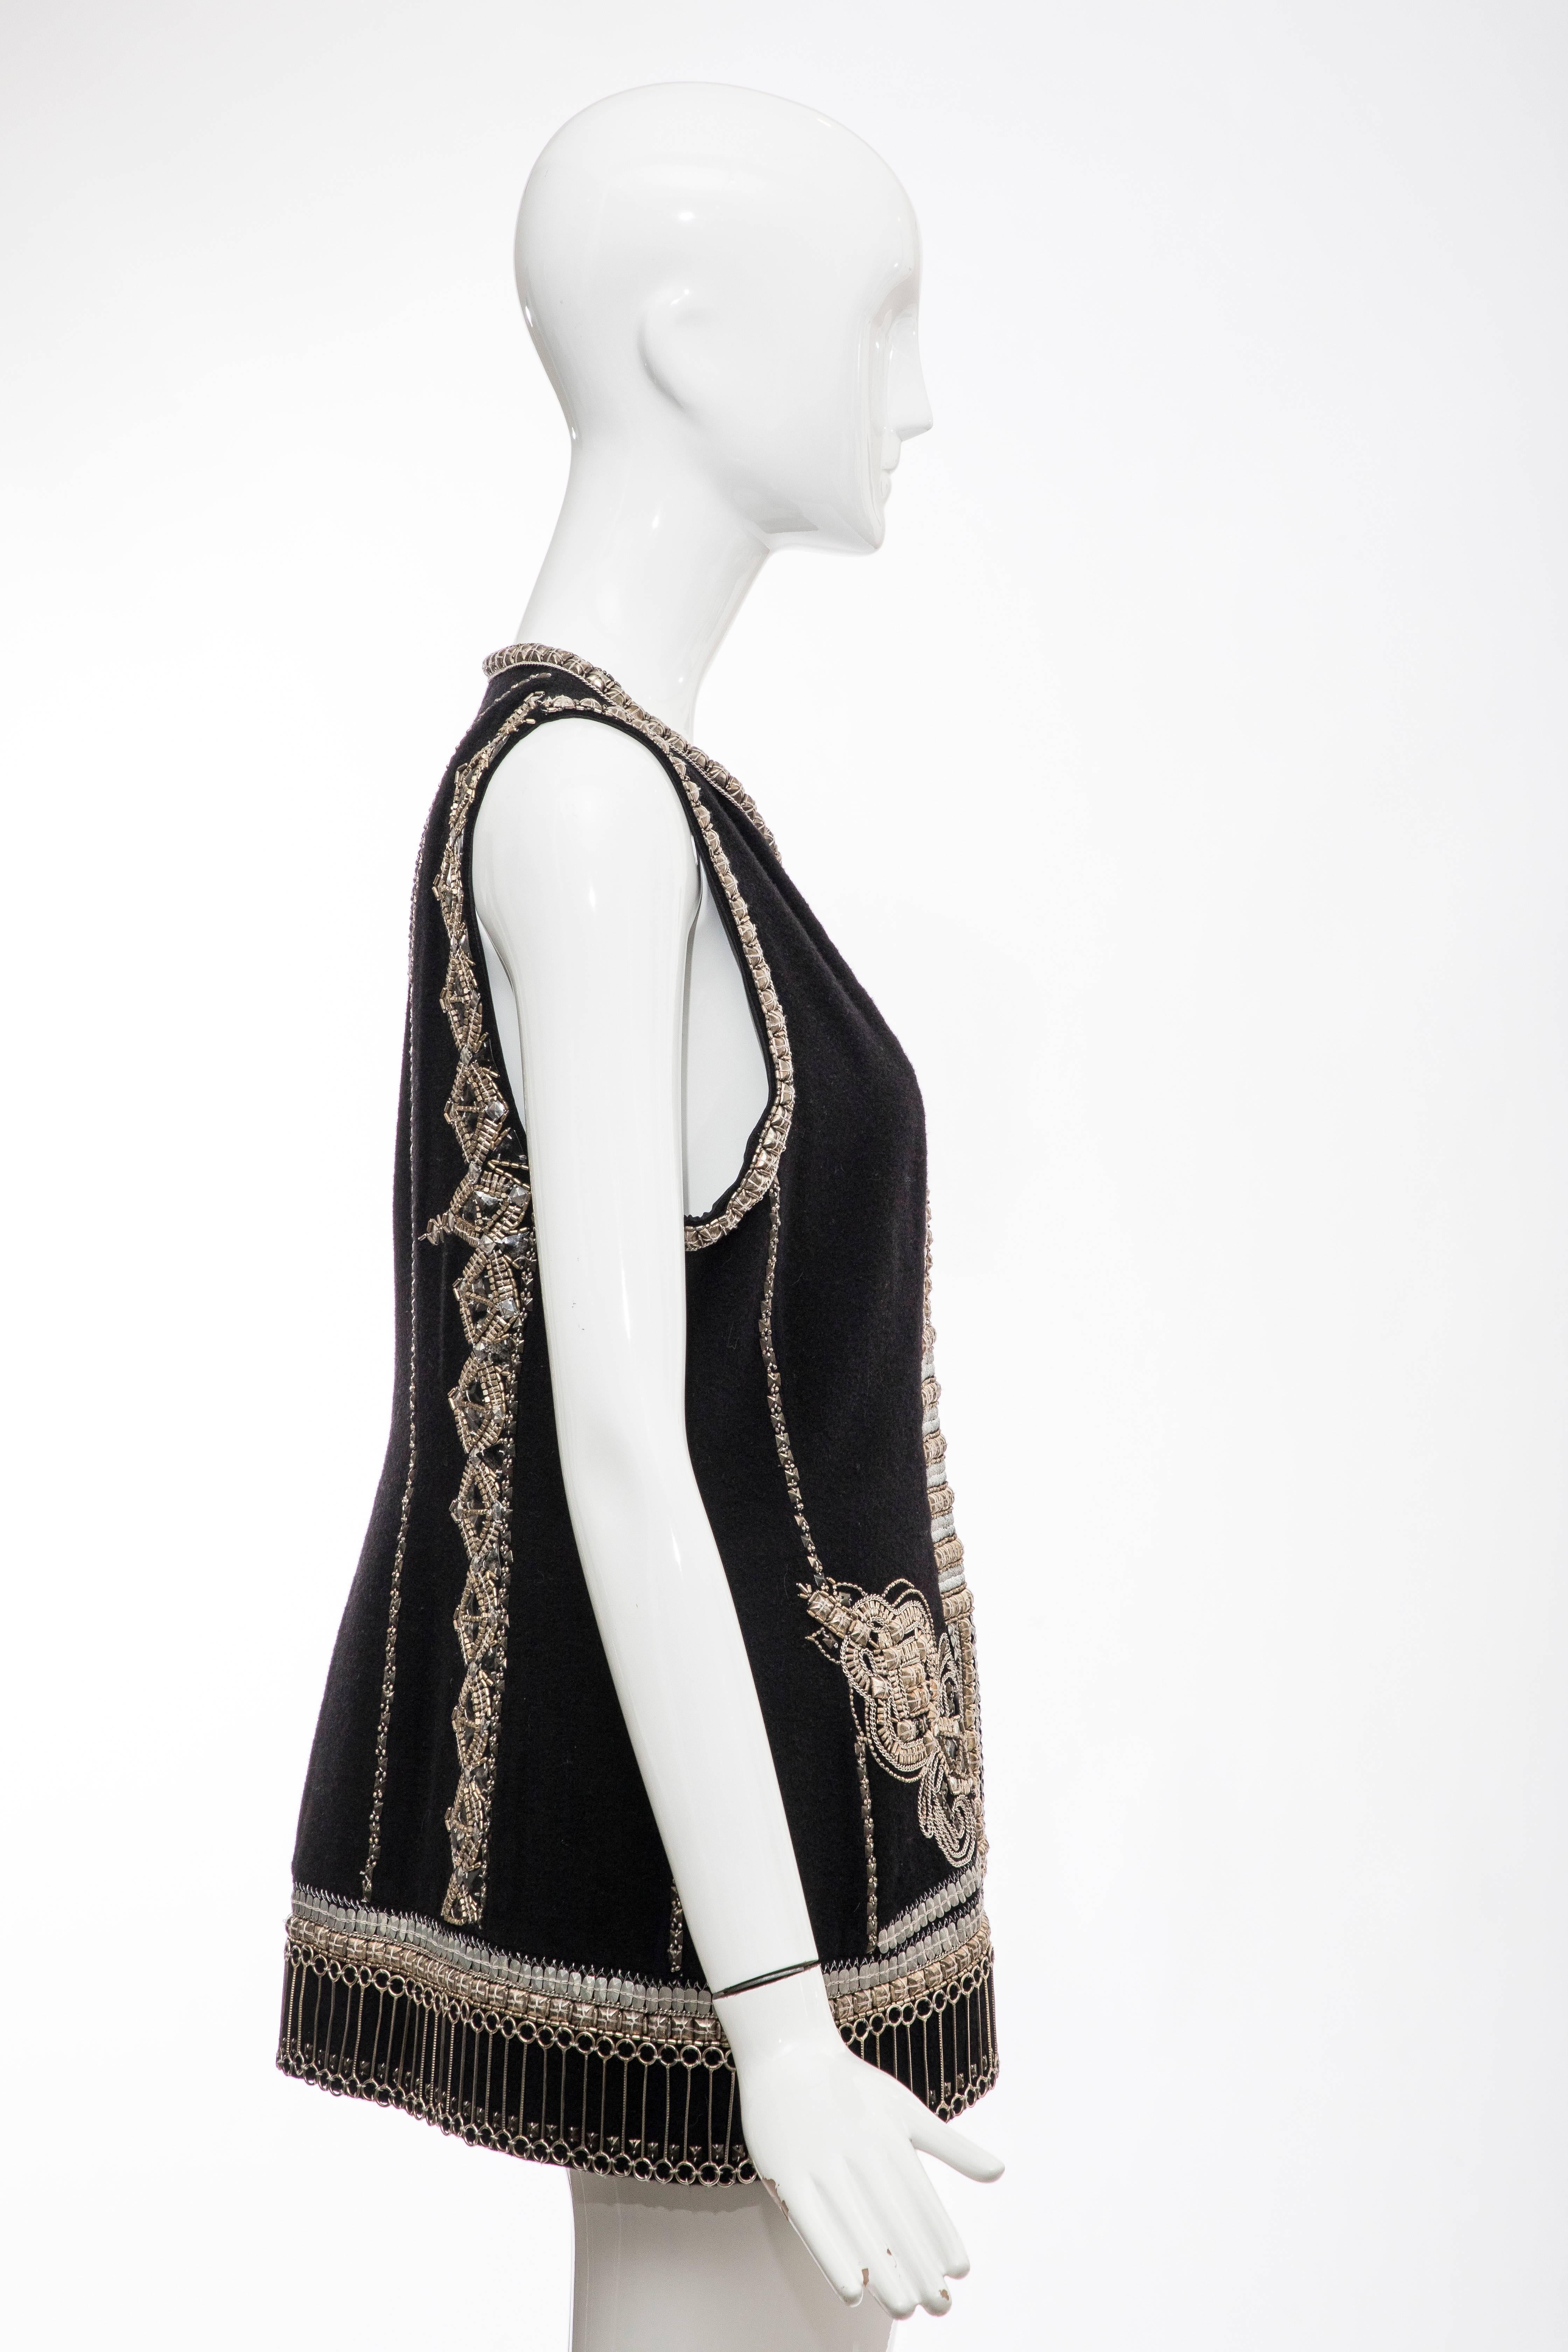 Dries Van Noten Black Wool Cashmere Silver Indian Embroidered Vest, Fall 2010 3